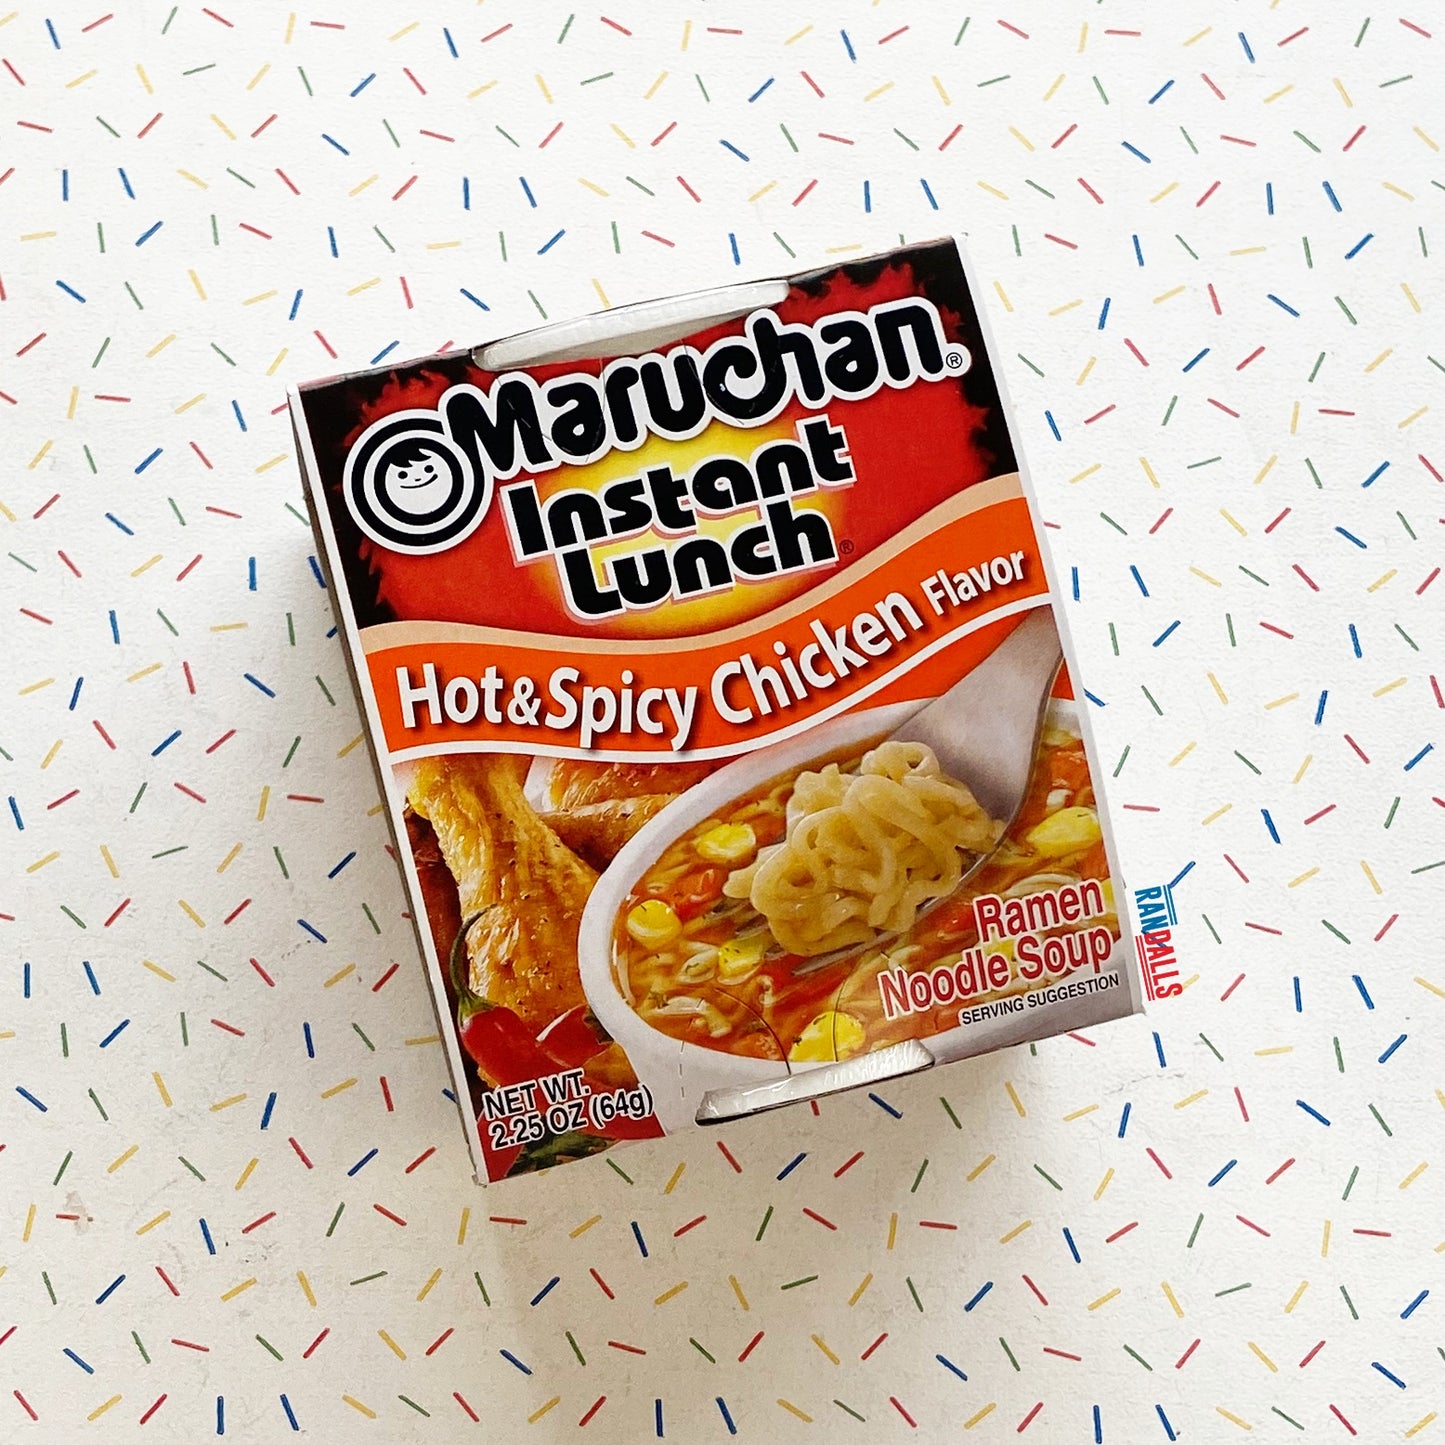 maruchan, ramen, ramen noodles, maruchan noodles, yakisoba, noodle soup, ramen instant lunch, noodles, hot & spicy chicken, usa, randalls,